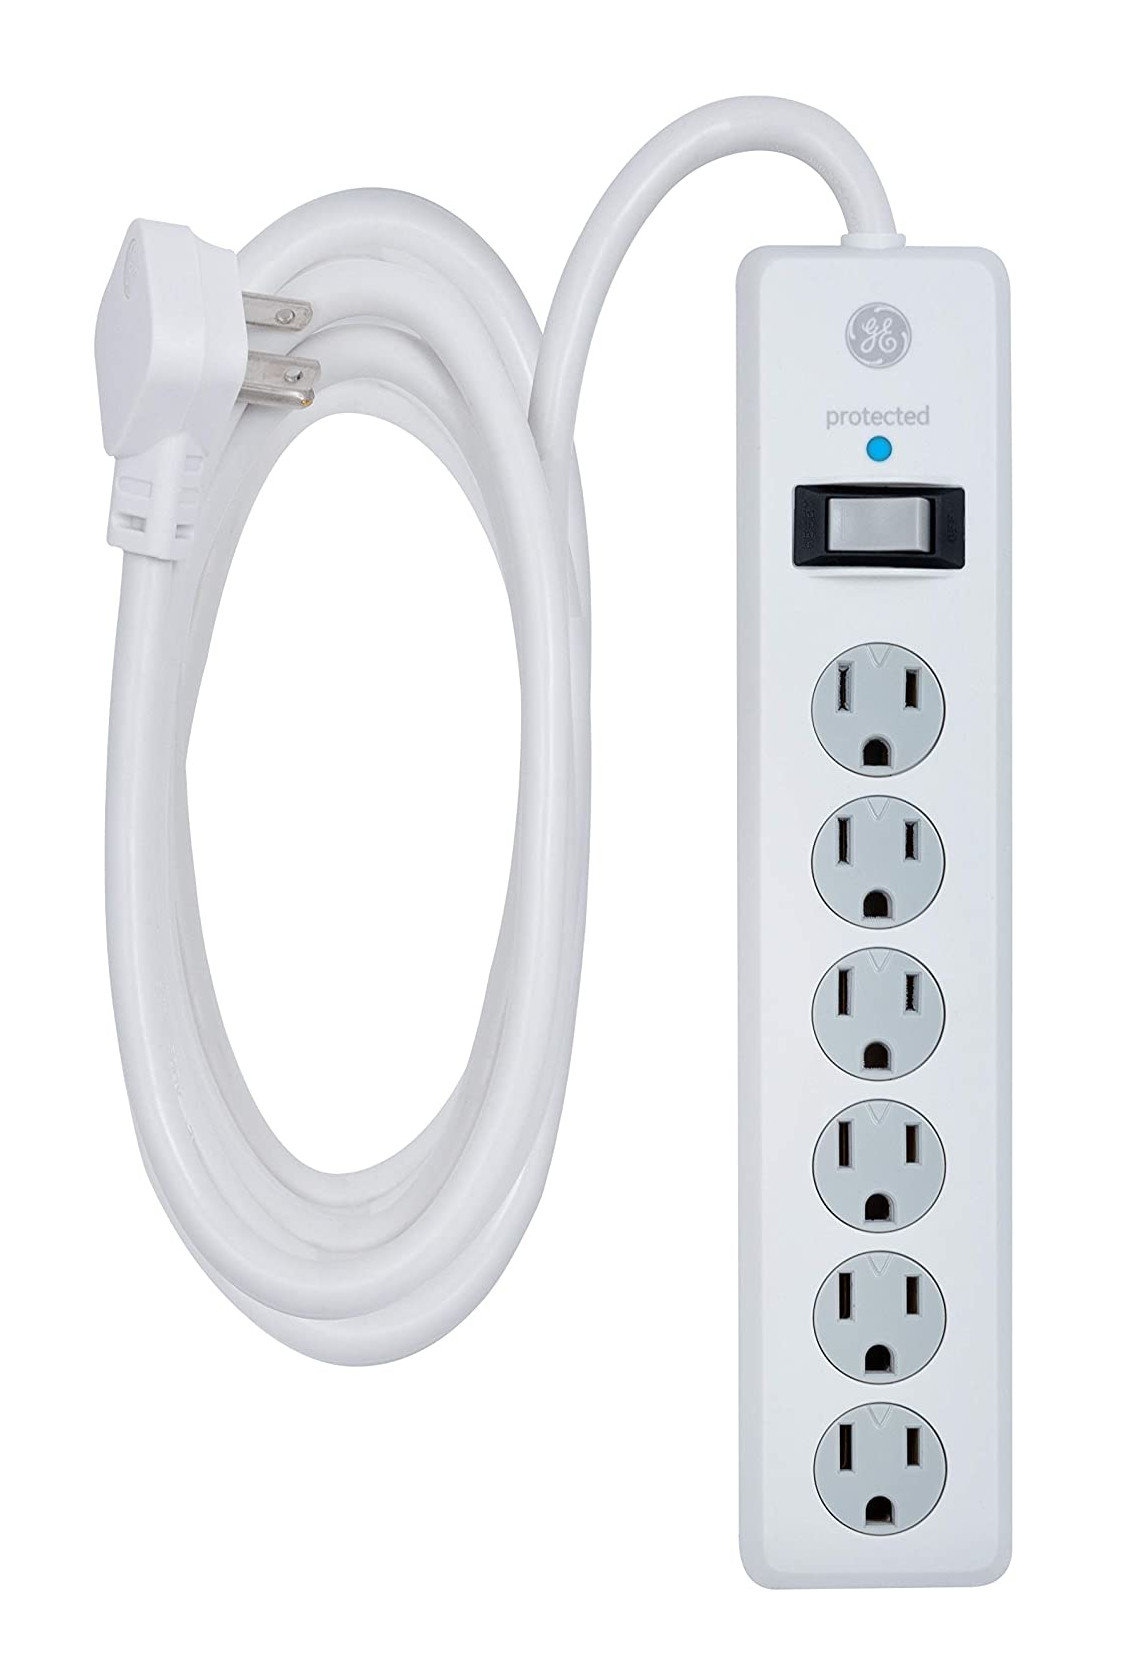 GE 6 Outlet Surge Protector 10 Ft Extension Cord Power Strip 800 Joules Flat Plug 14092